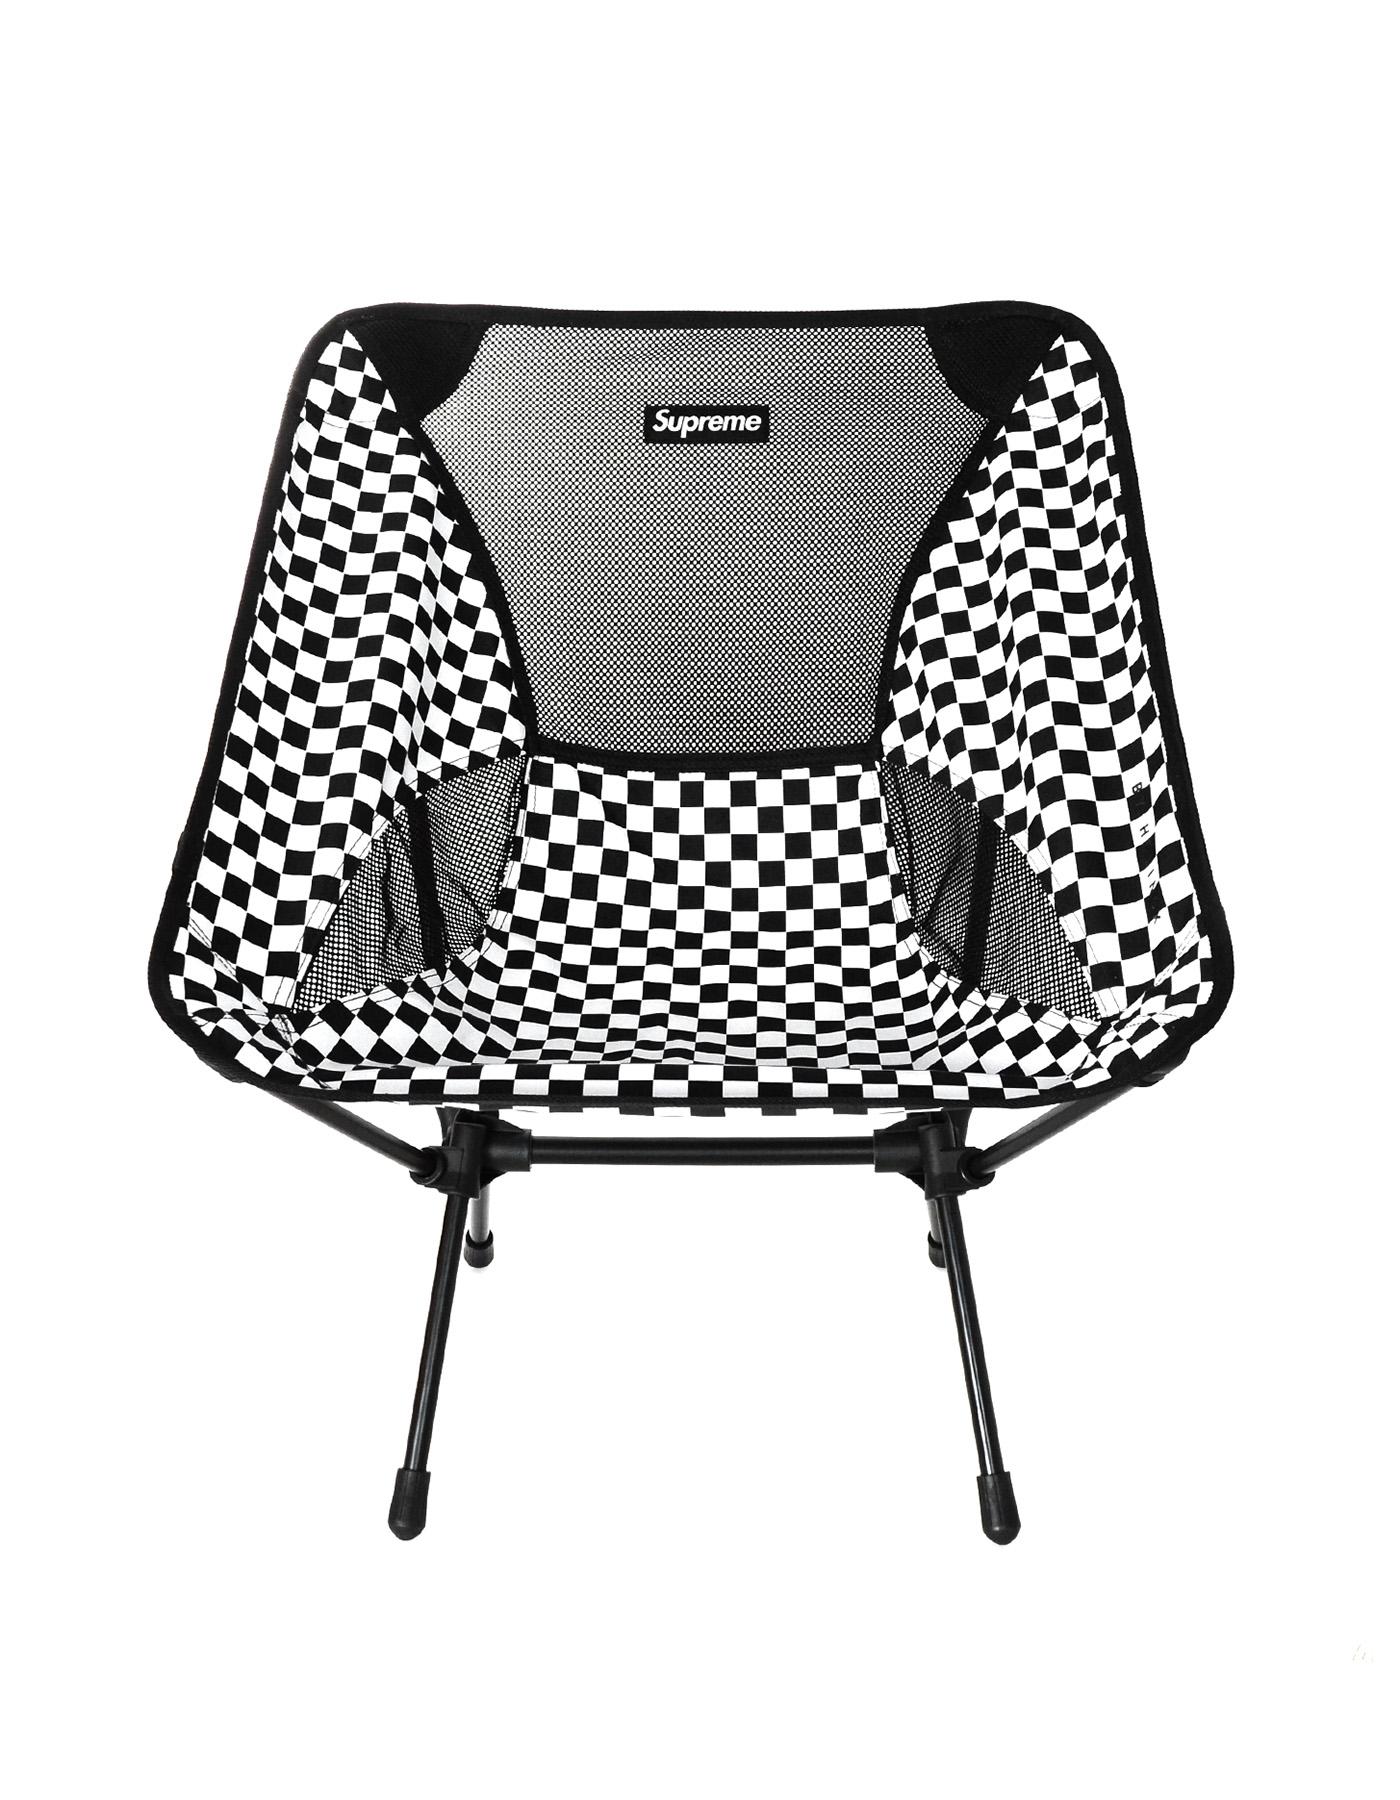 Supreme x Helinox COLLECTOR'S Black/White Check Folding Chair with 